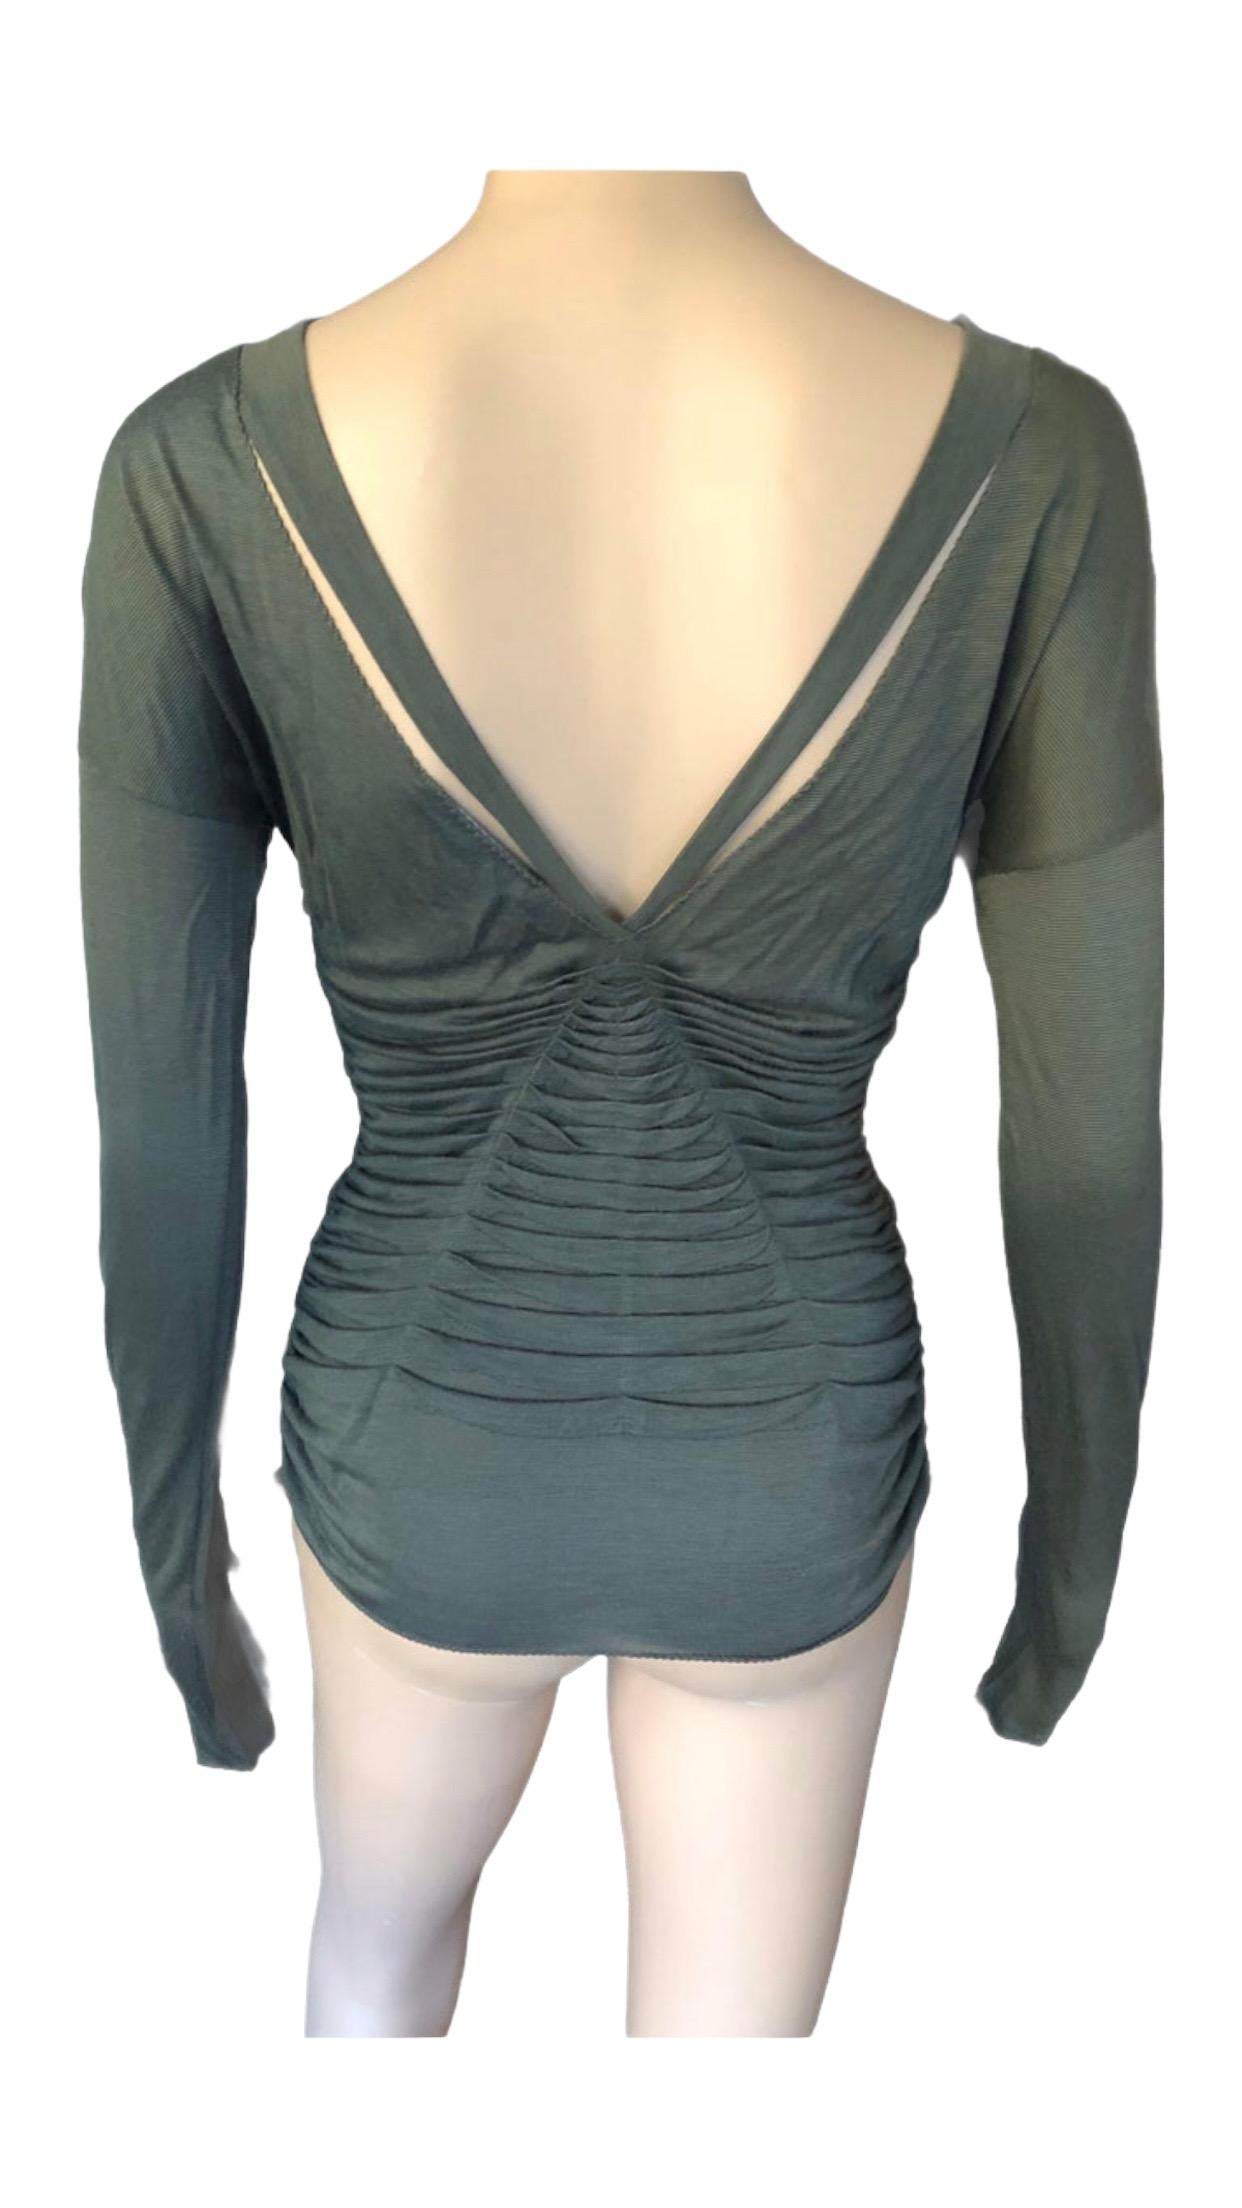 Gucci by Tom Ford S/S 2004 Plunging Ruched Long Sleeve Sweater Top  In Good Condition For Sale In Naples, FL